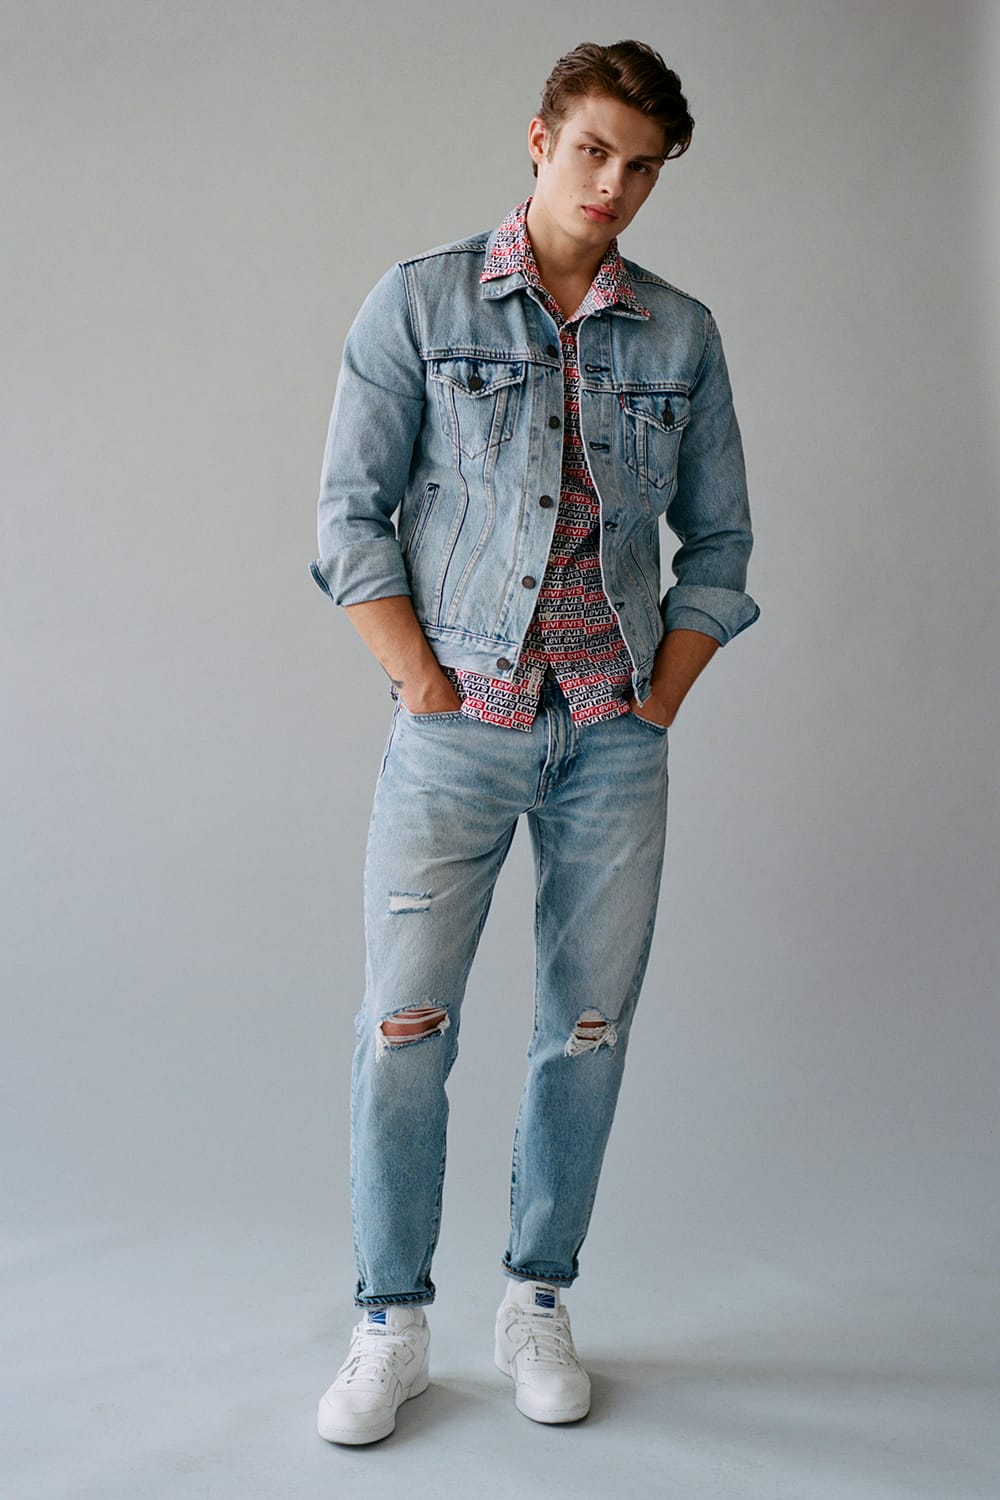 Levi's Fall/Winter 2018 Collection 